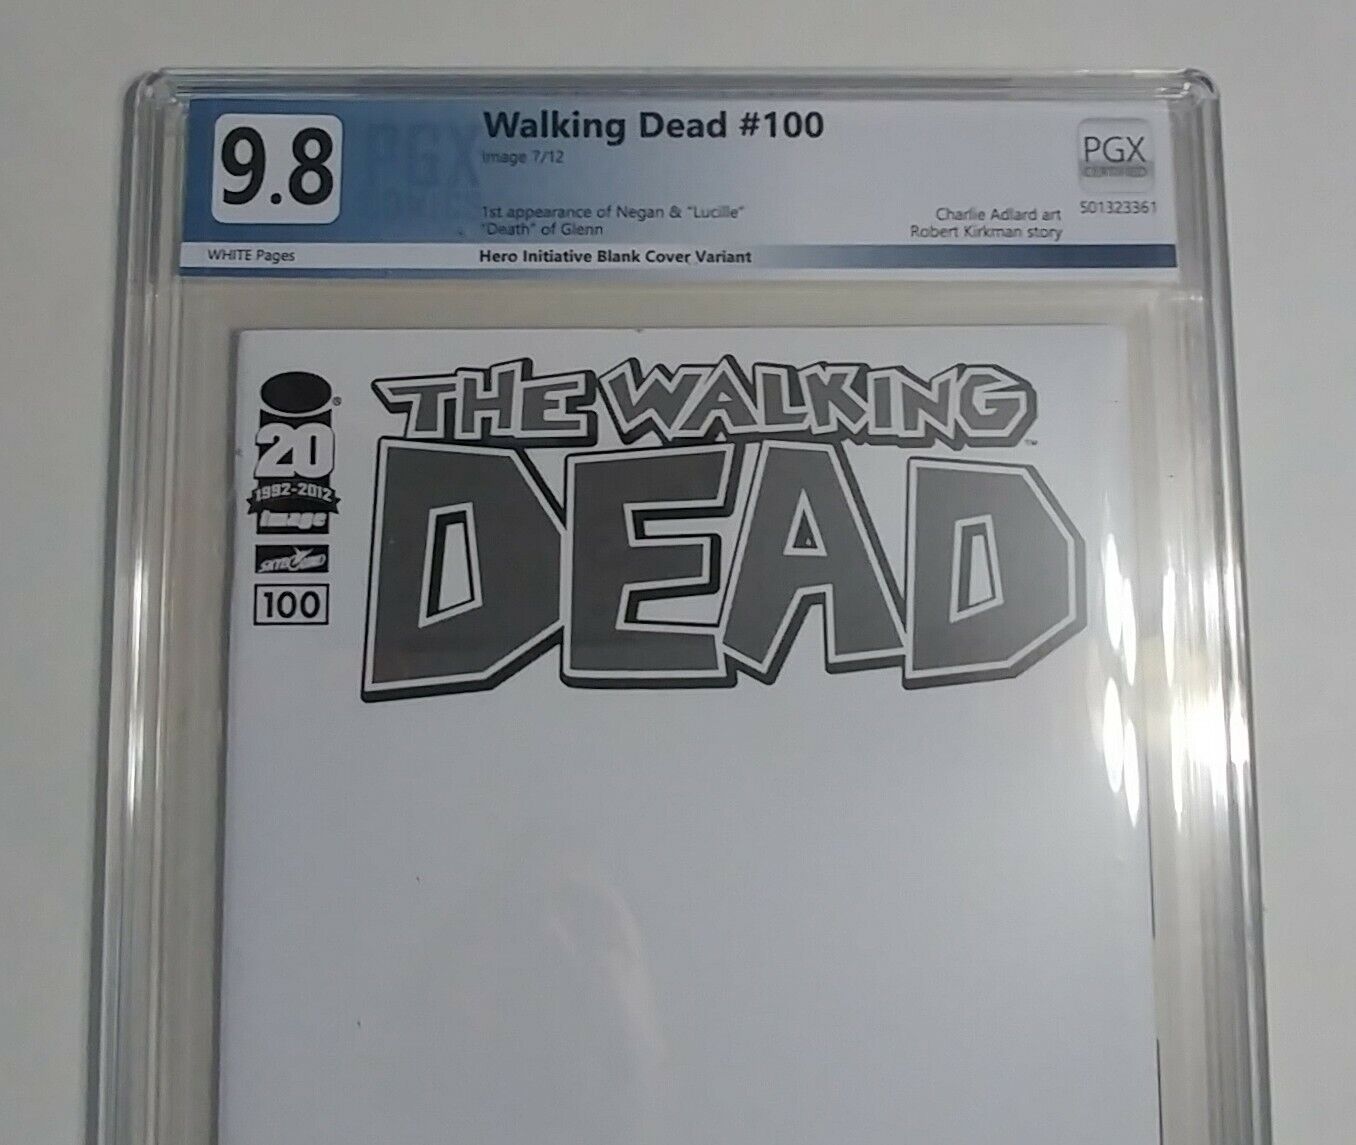 Walking Dead #100 9.8 PGX, HERO, BLANK COVER Variant (not CGC) RARE less then 20